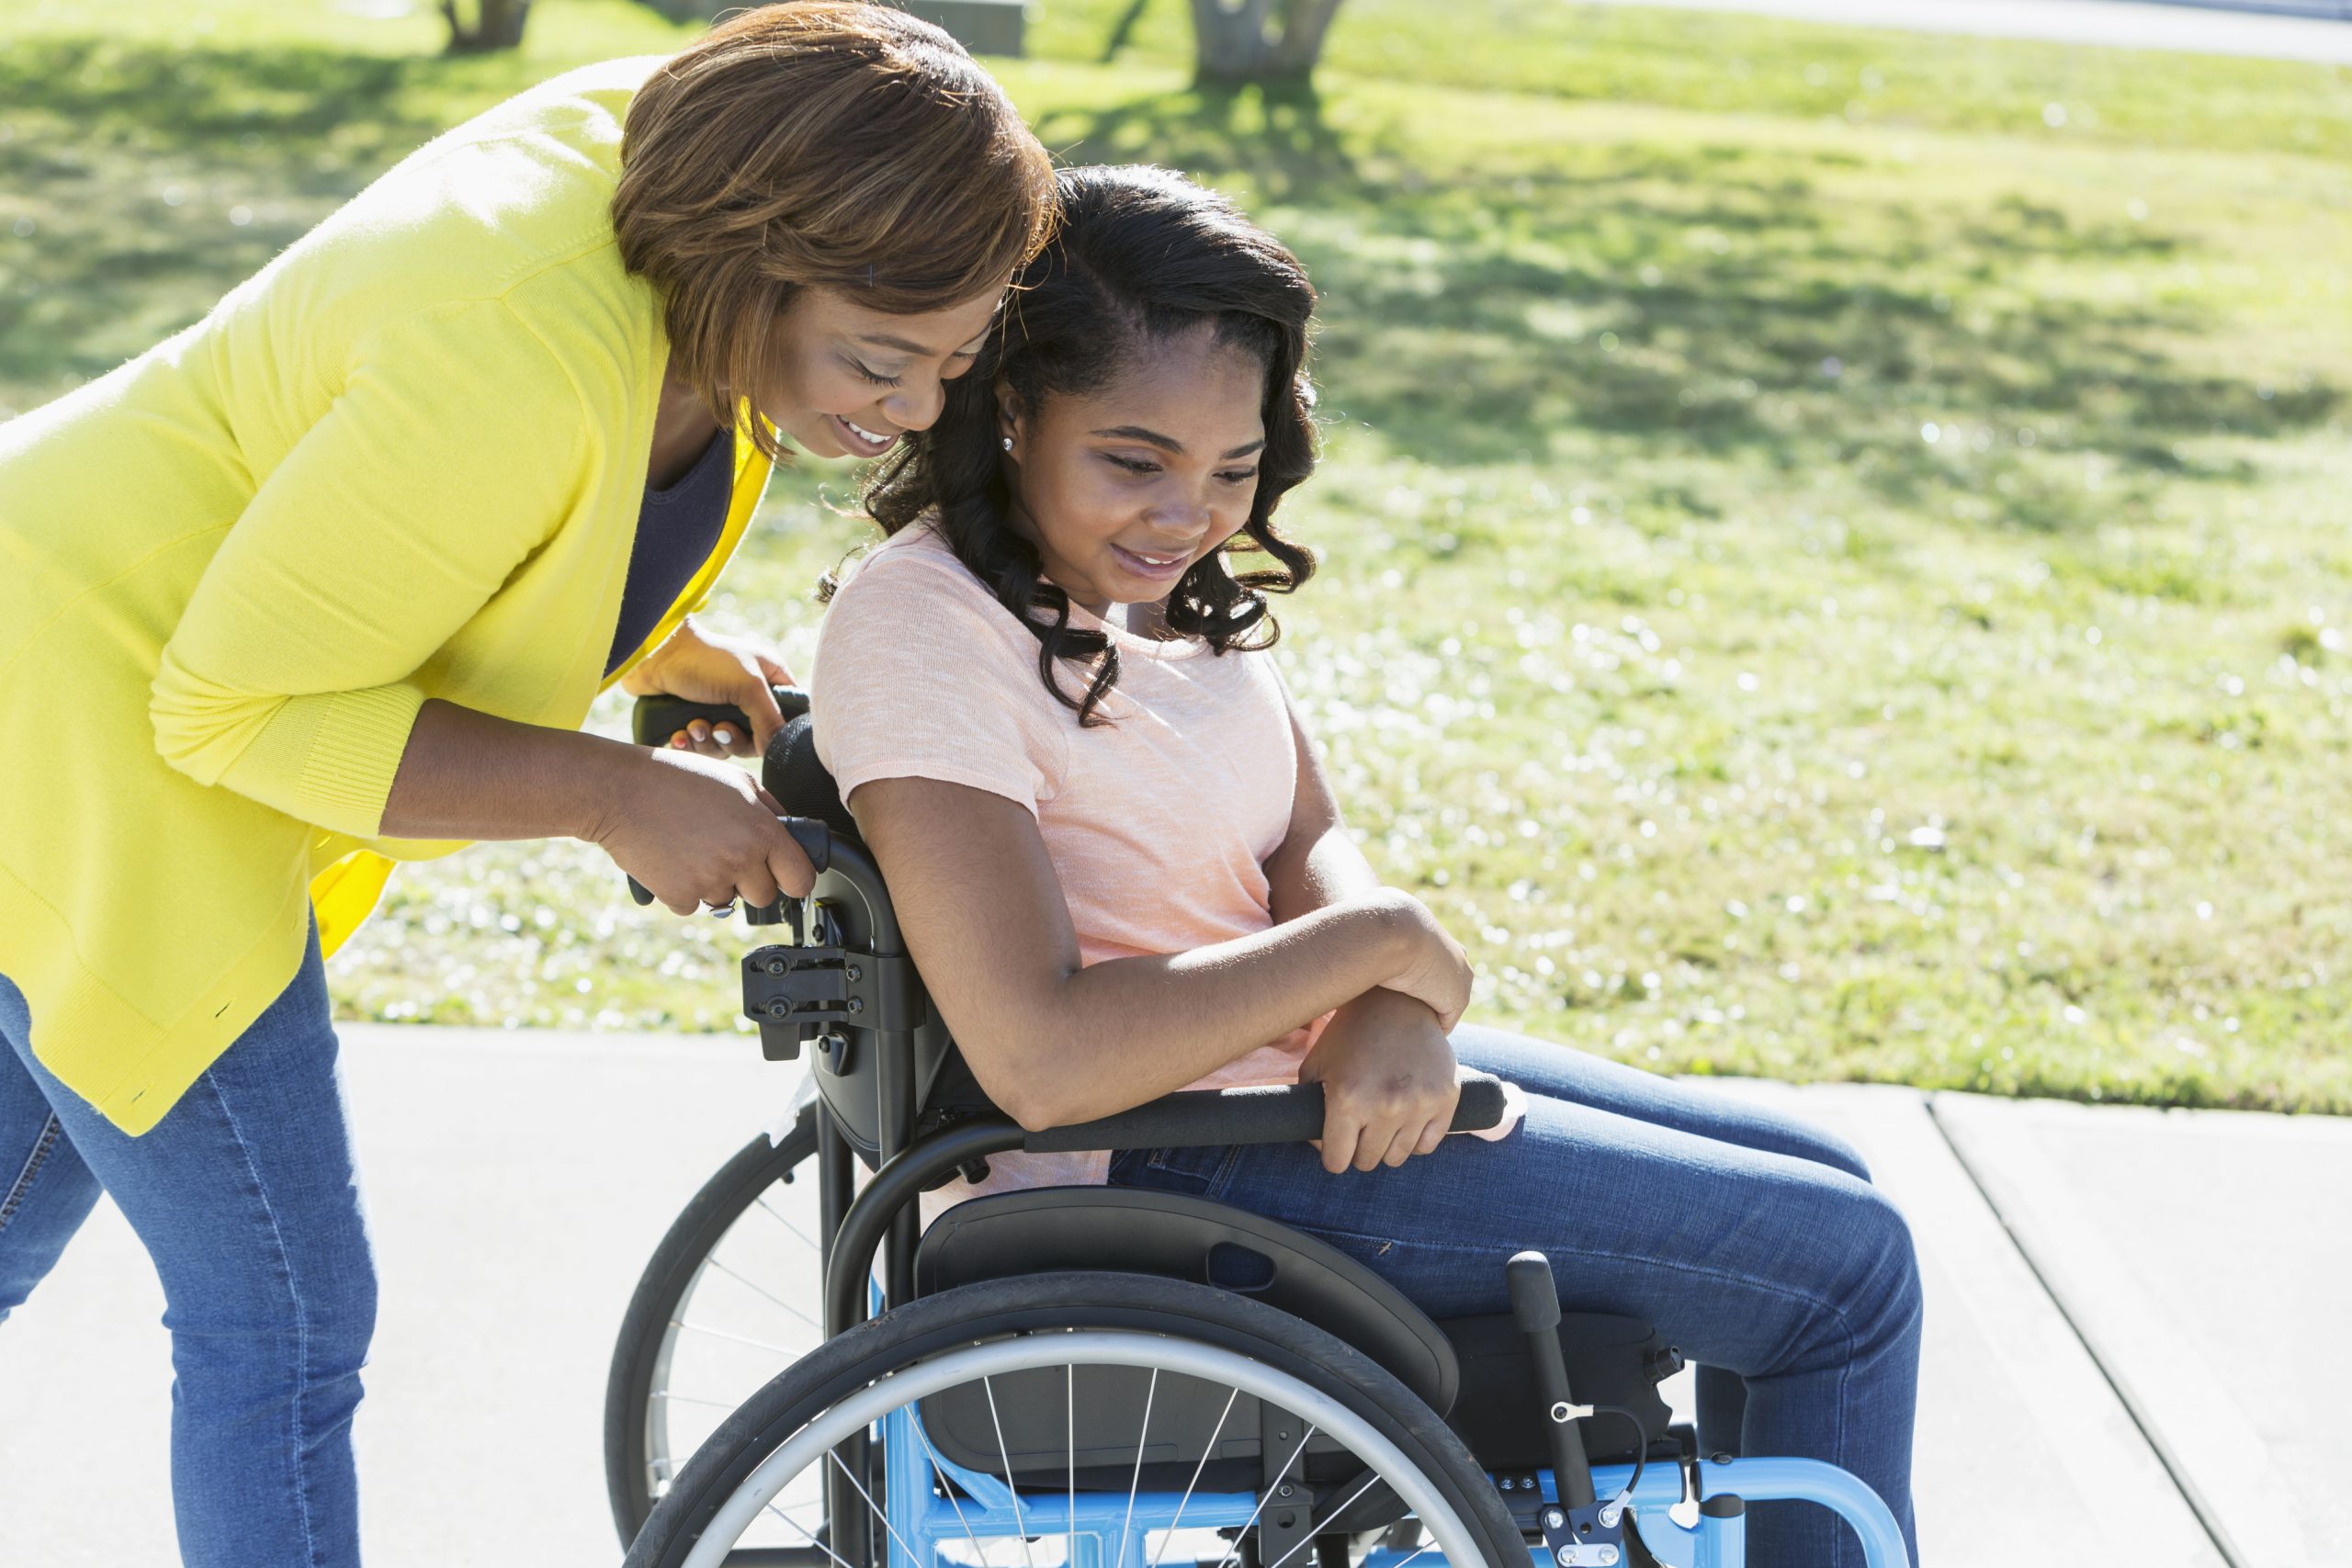 An African-American woman walking with her daughter who is a paraplegic in a wheelchair, outdoors. She is 15 years old, mixed race African-American and Hispanic.